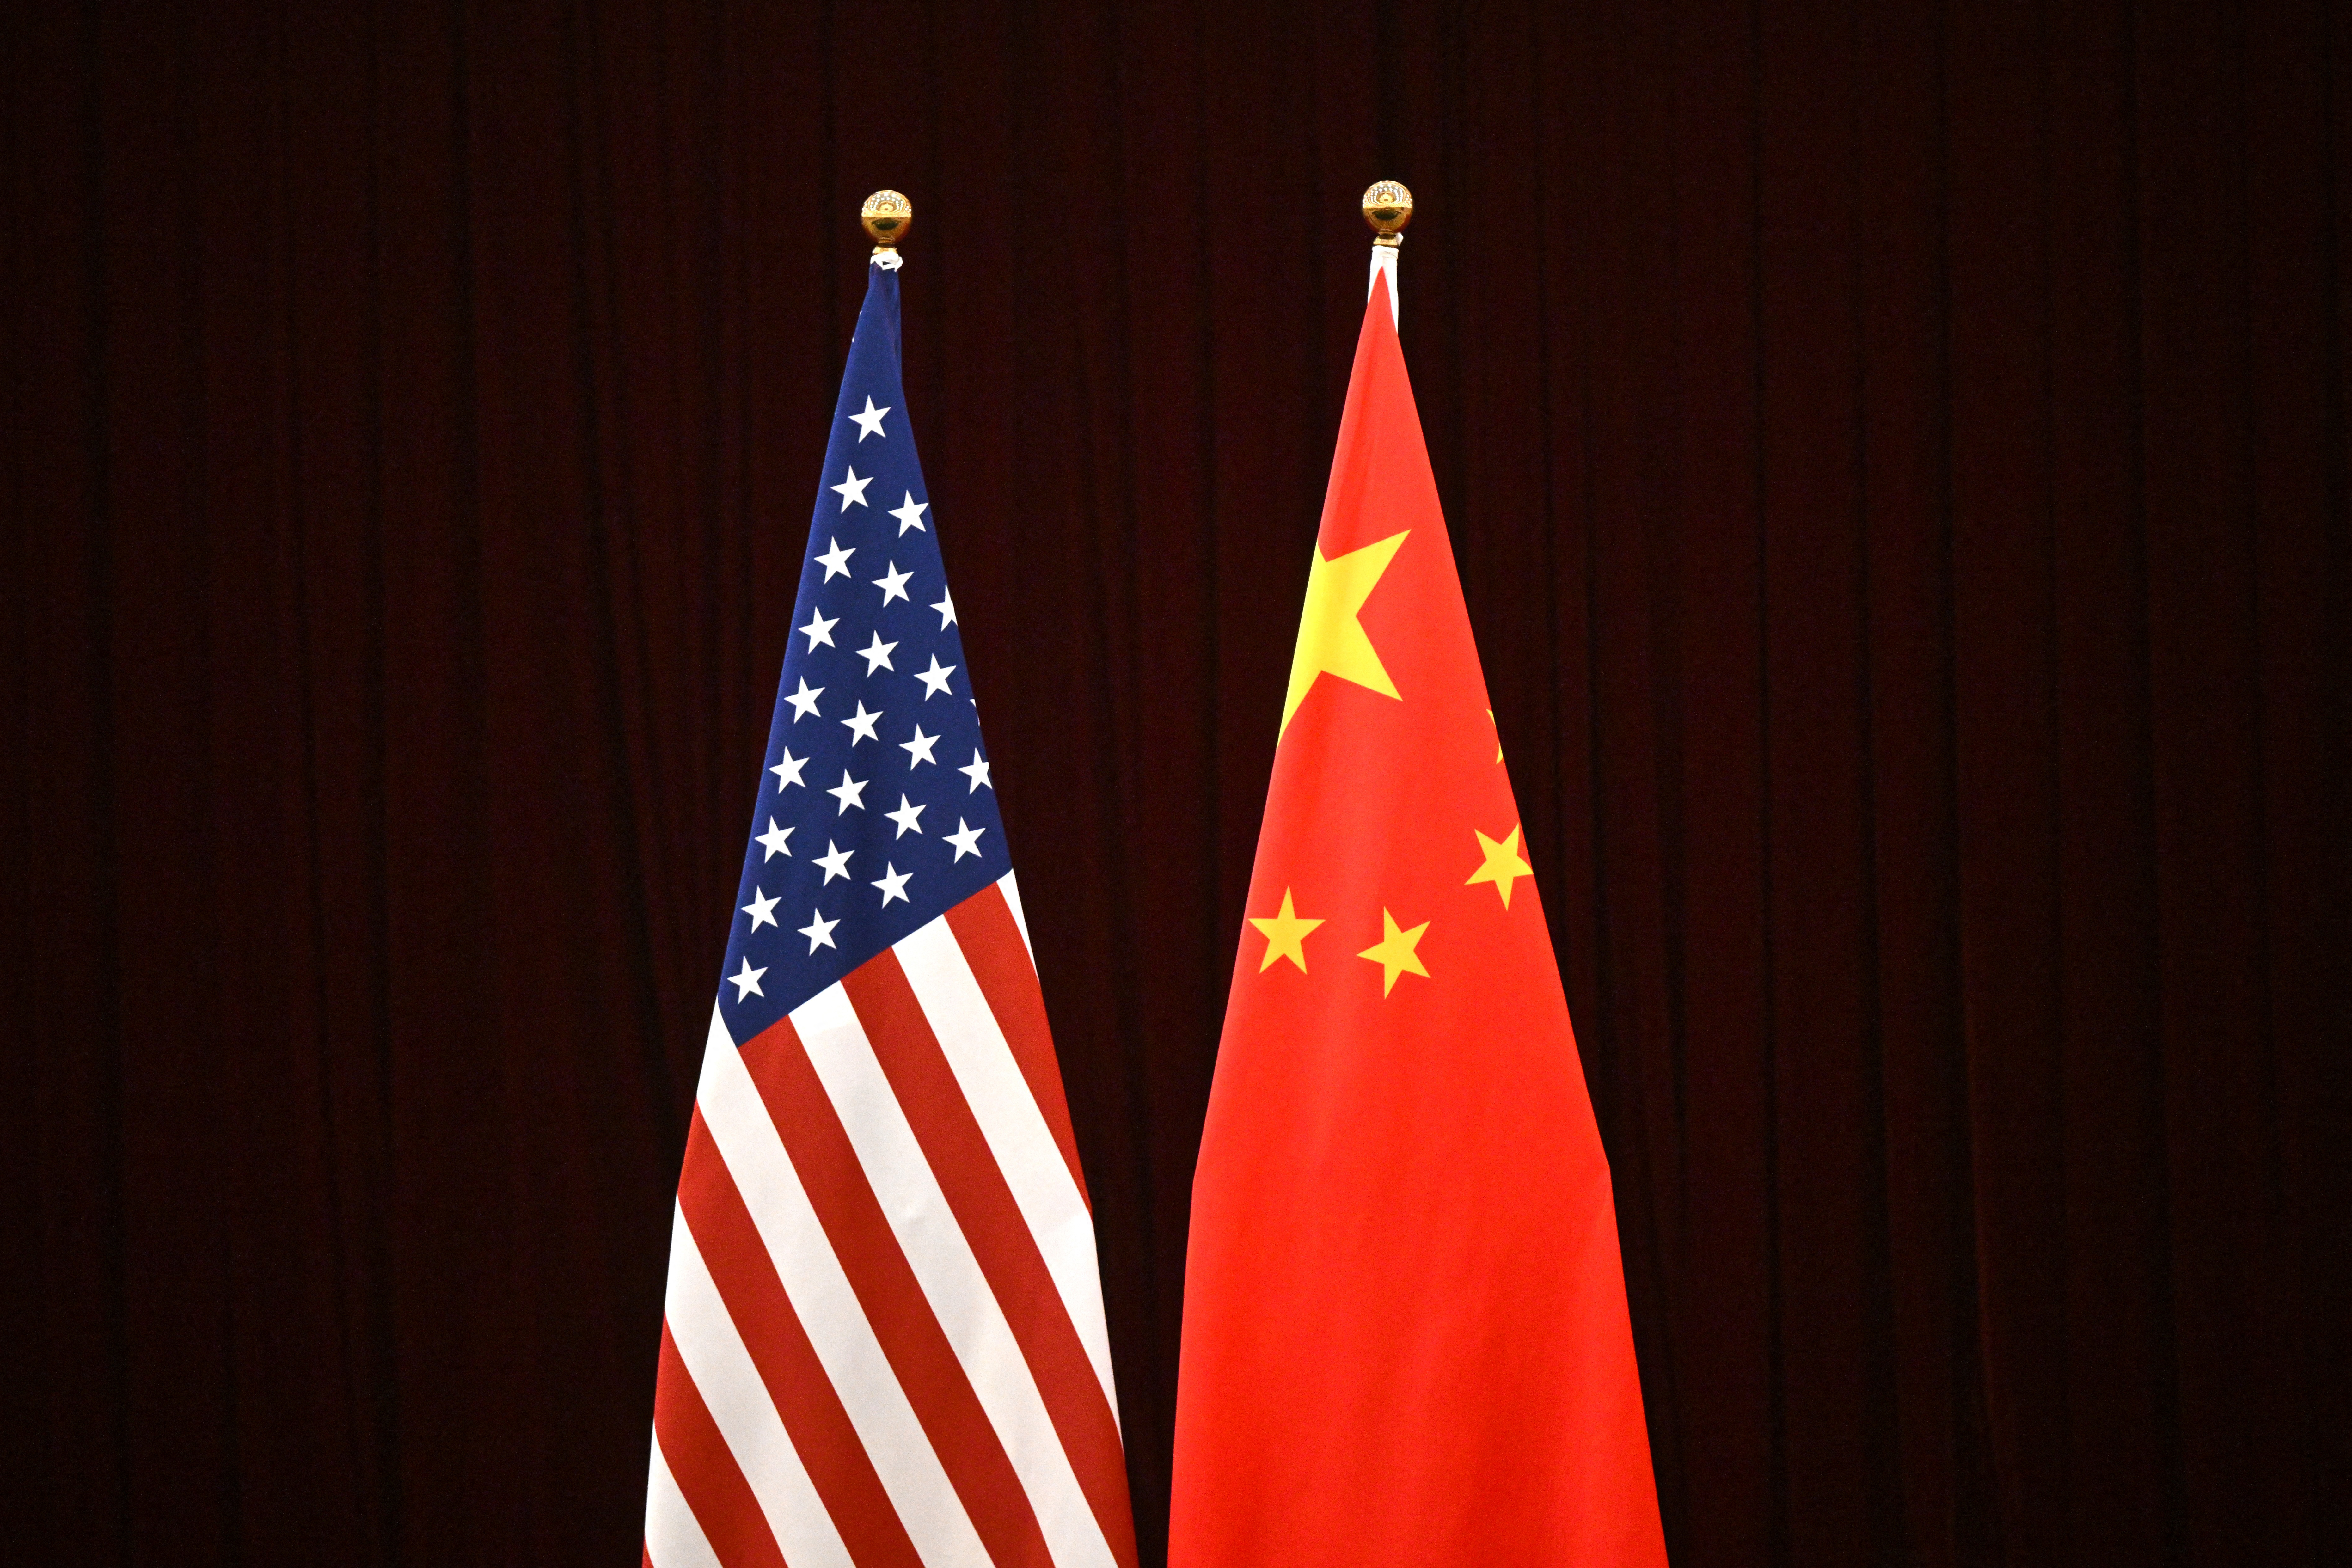 US and China flags against a black backdrop